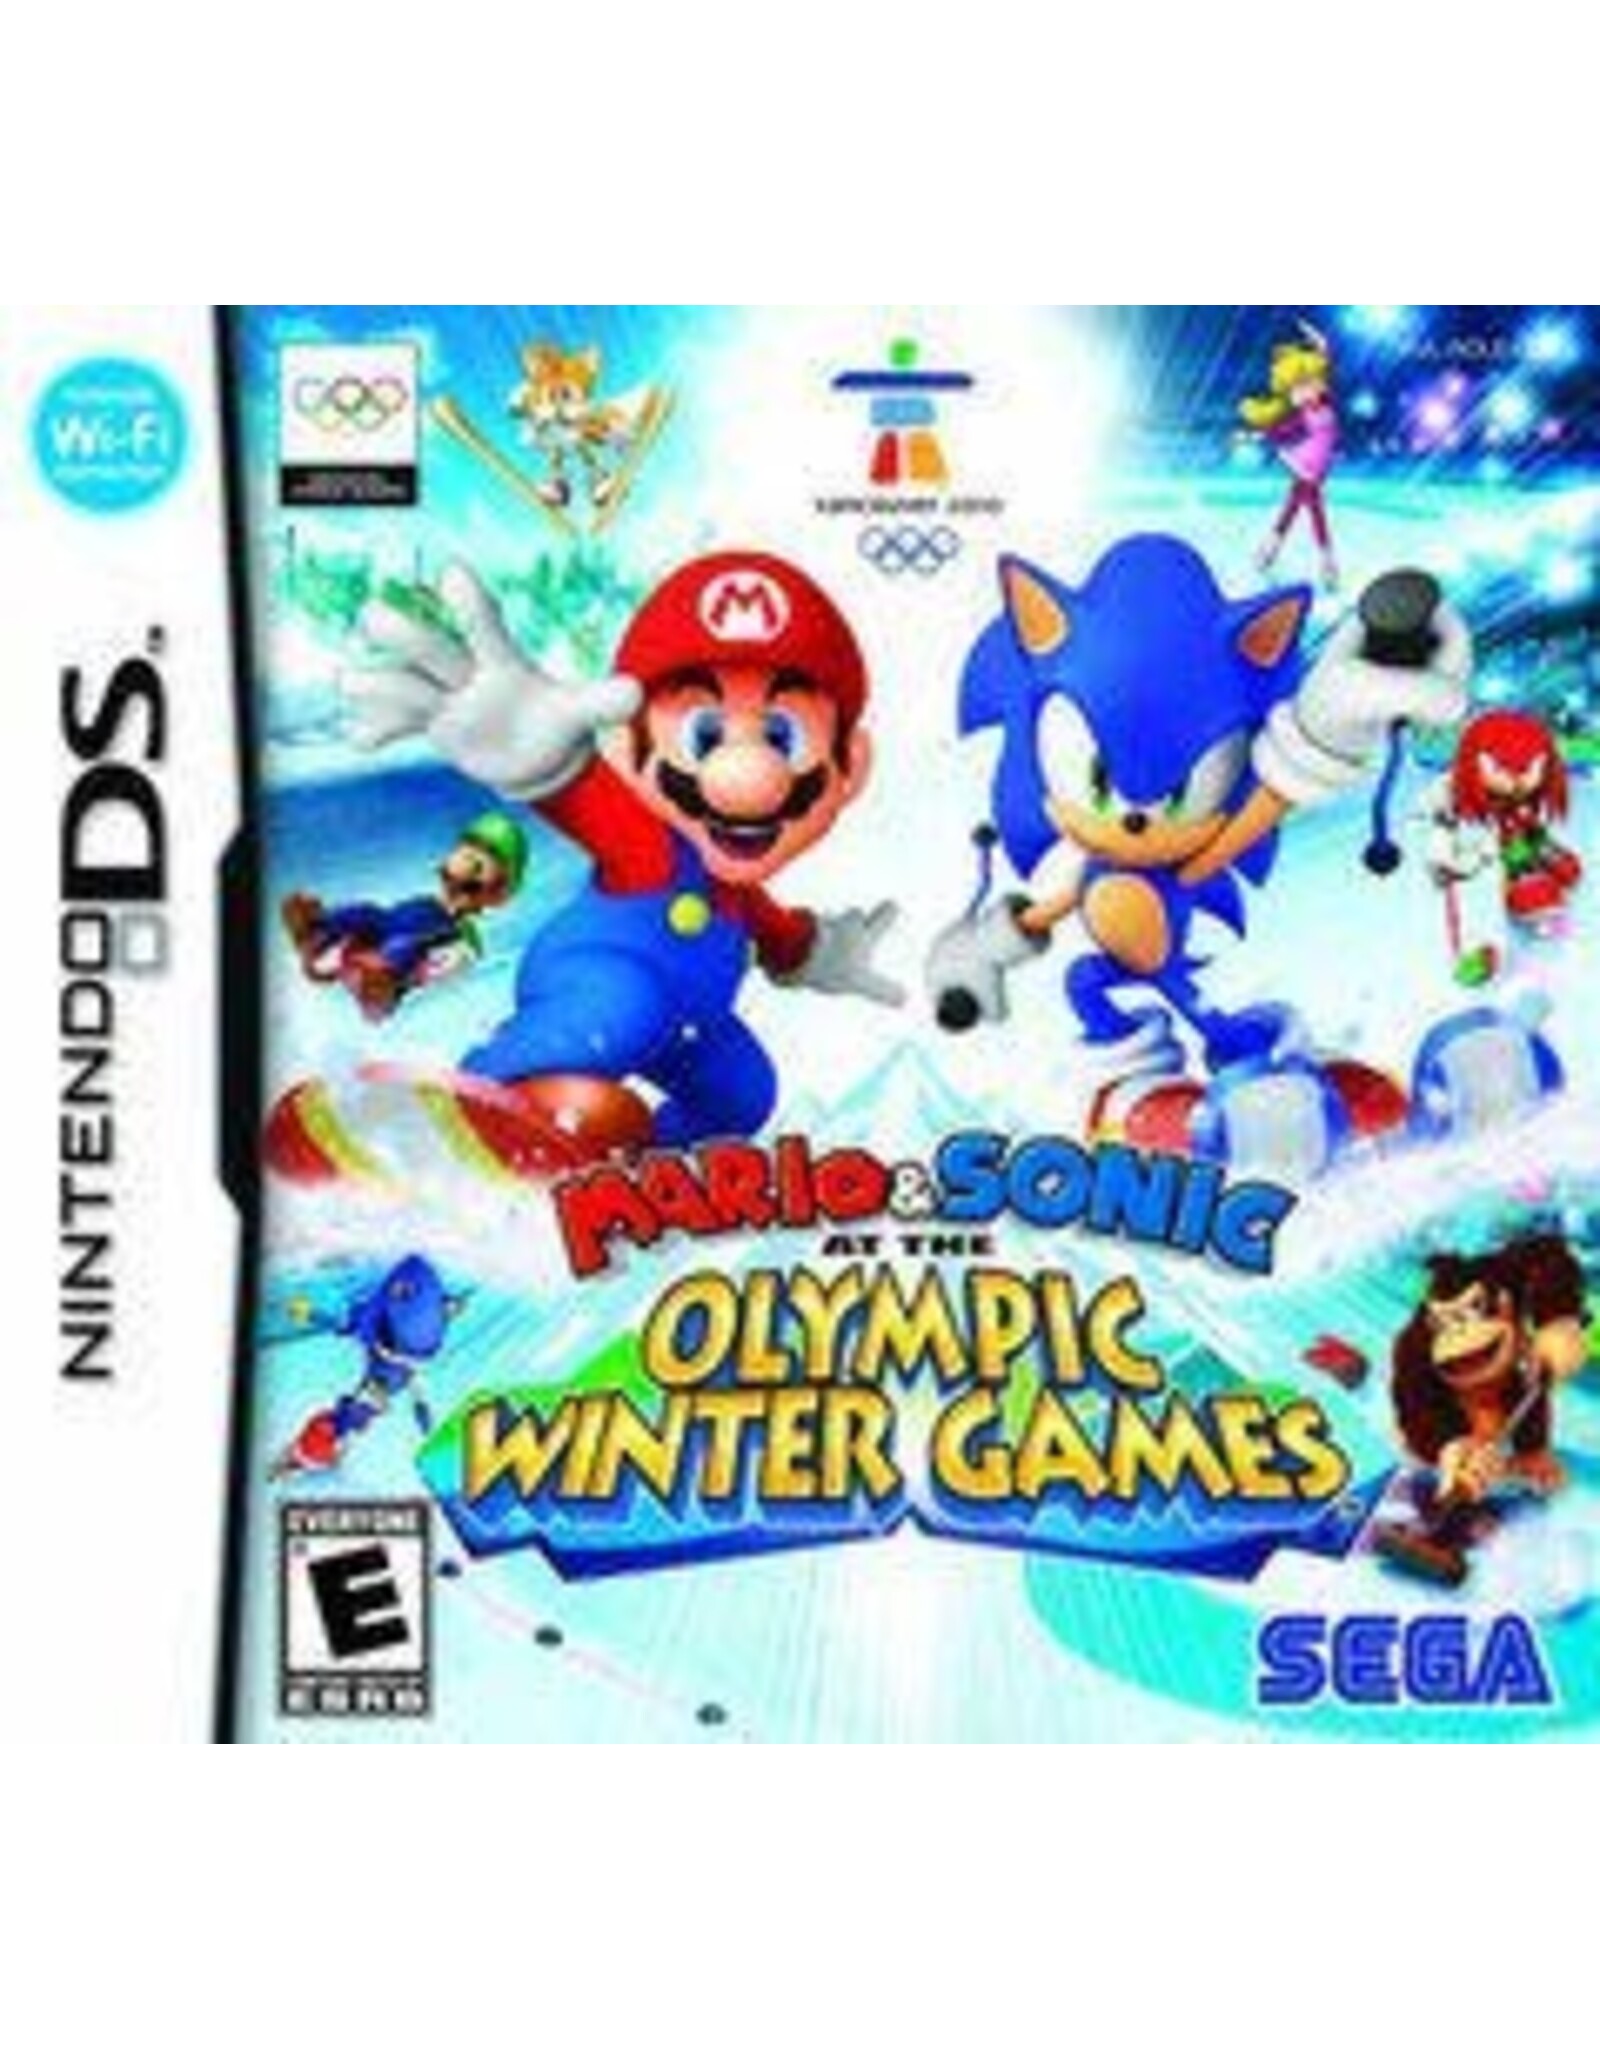 Nintendo DS Mario and Sonic at the Olympic Winter Games (Used)